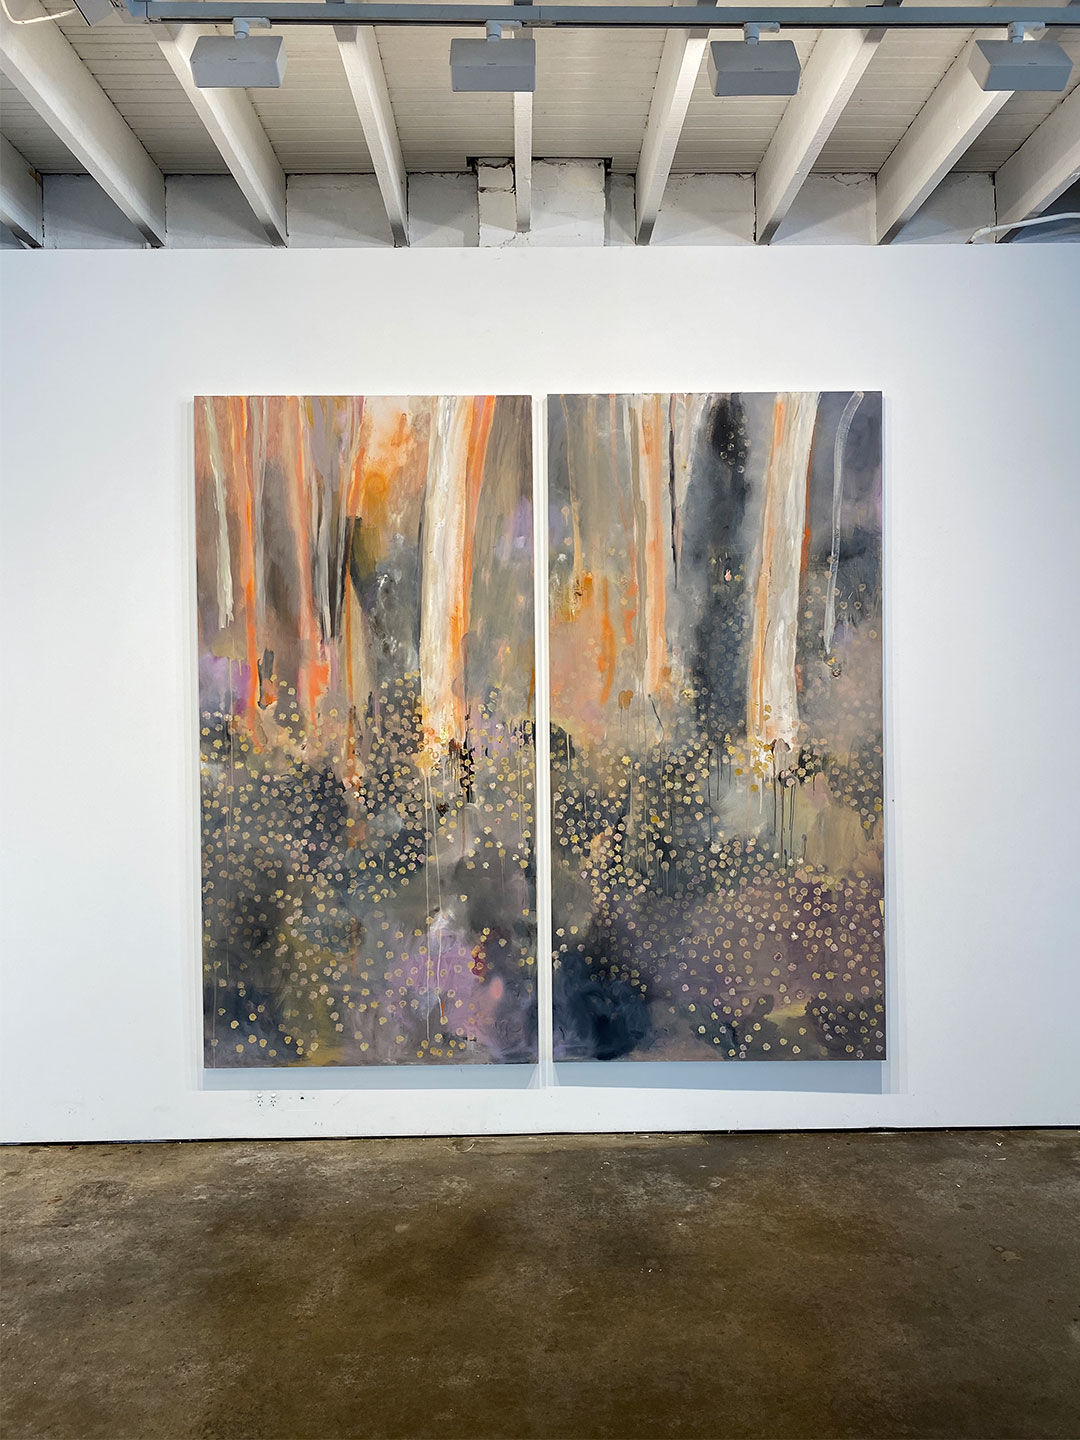 Installation view of artwork by Dan Kyle